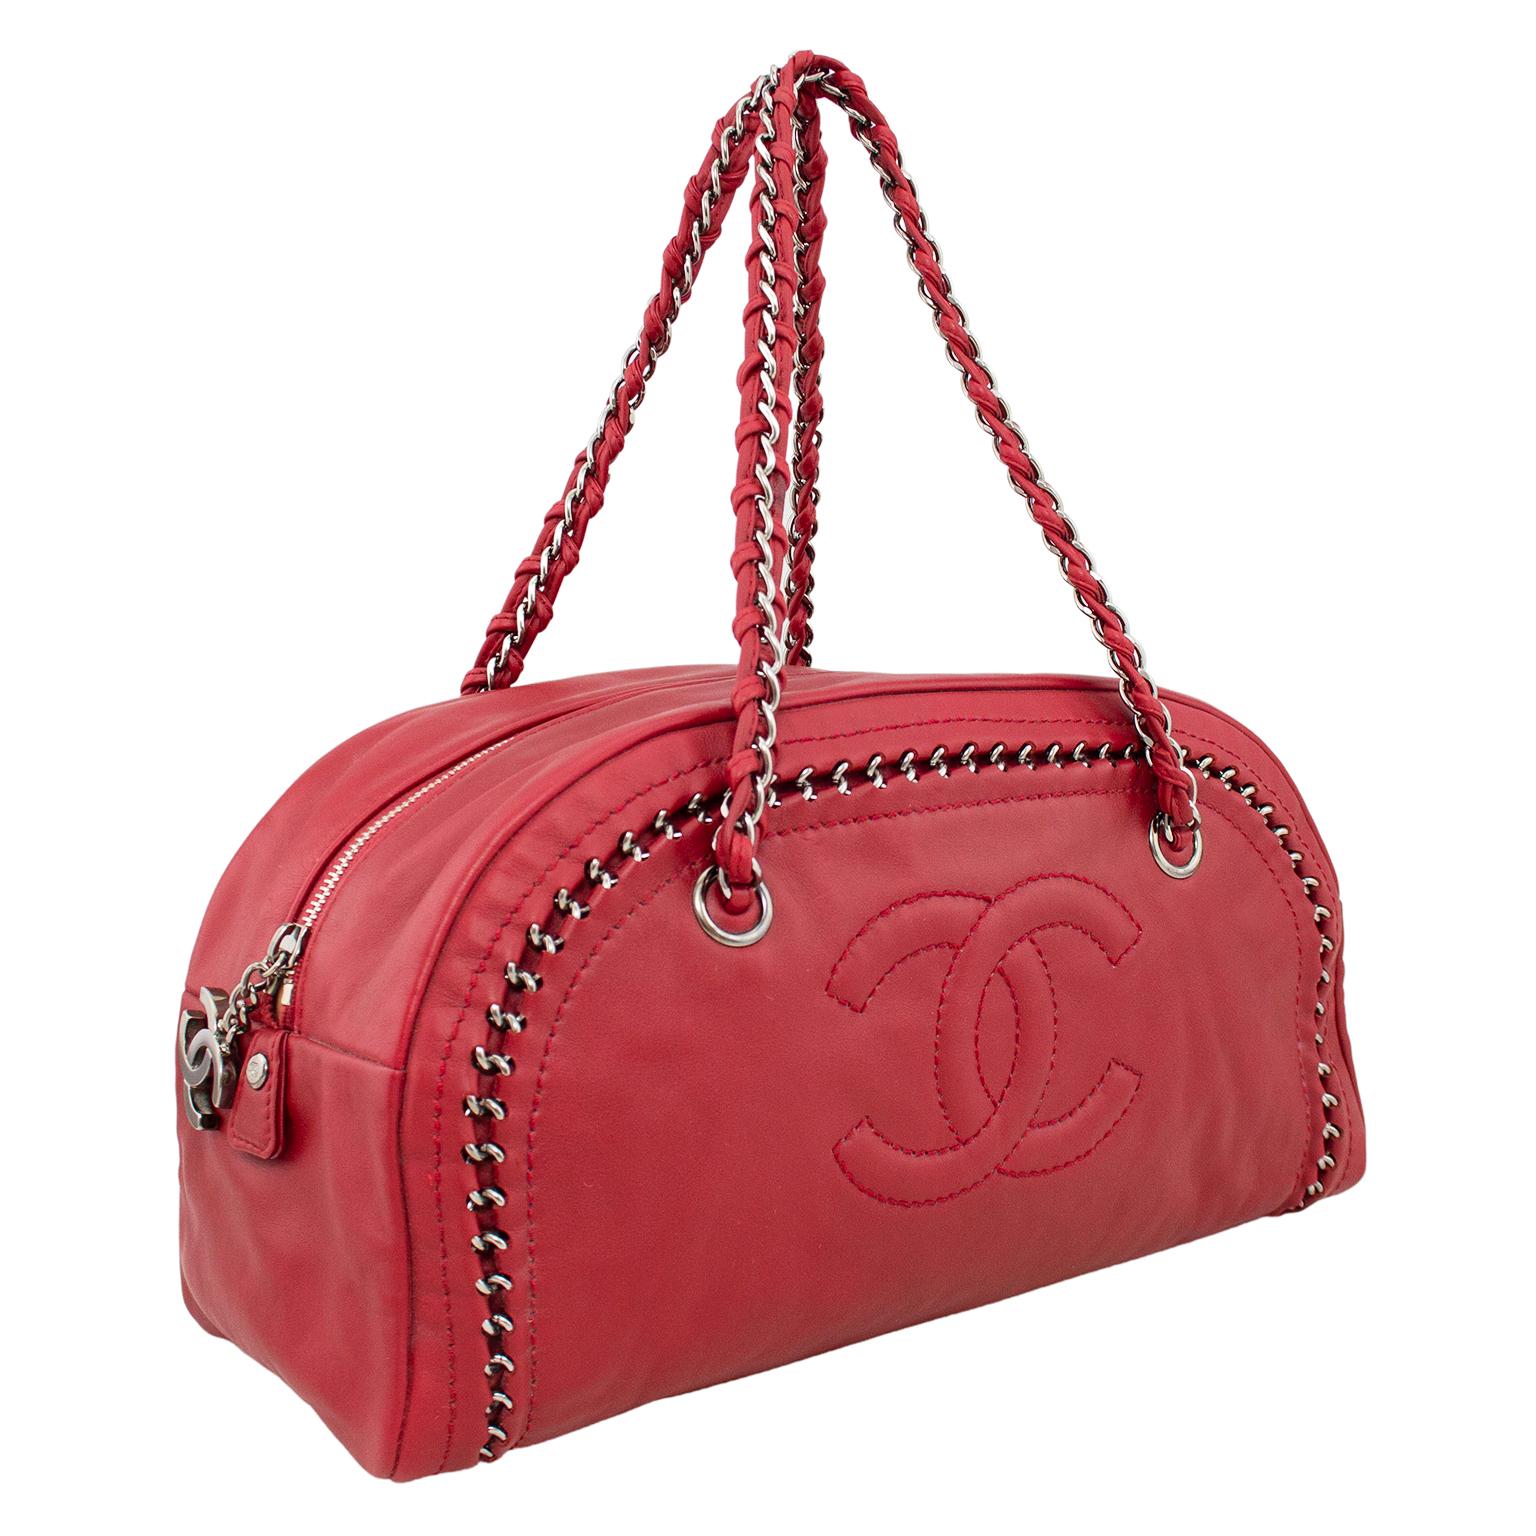 Designed in 2006 by Karl Lagerfeld, this is the Chanel Luxe Ligne bowler bag in a beautiful raspberry leather. Supple leather with silver tone embedded chain trim. Double top handles are leather with silver chain woven through. Large embossed cc